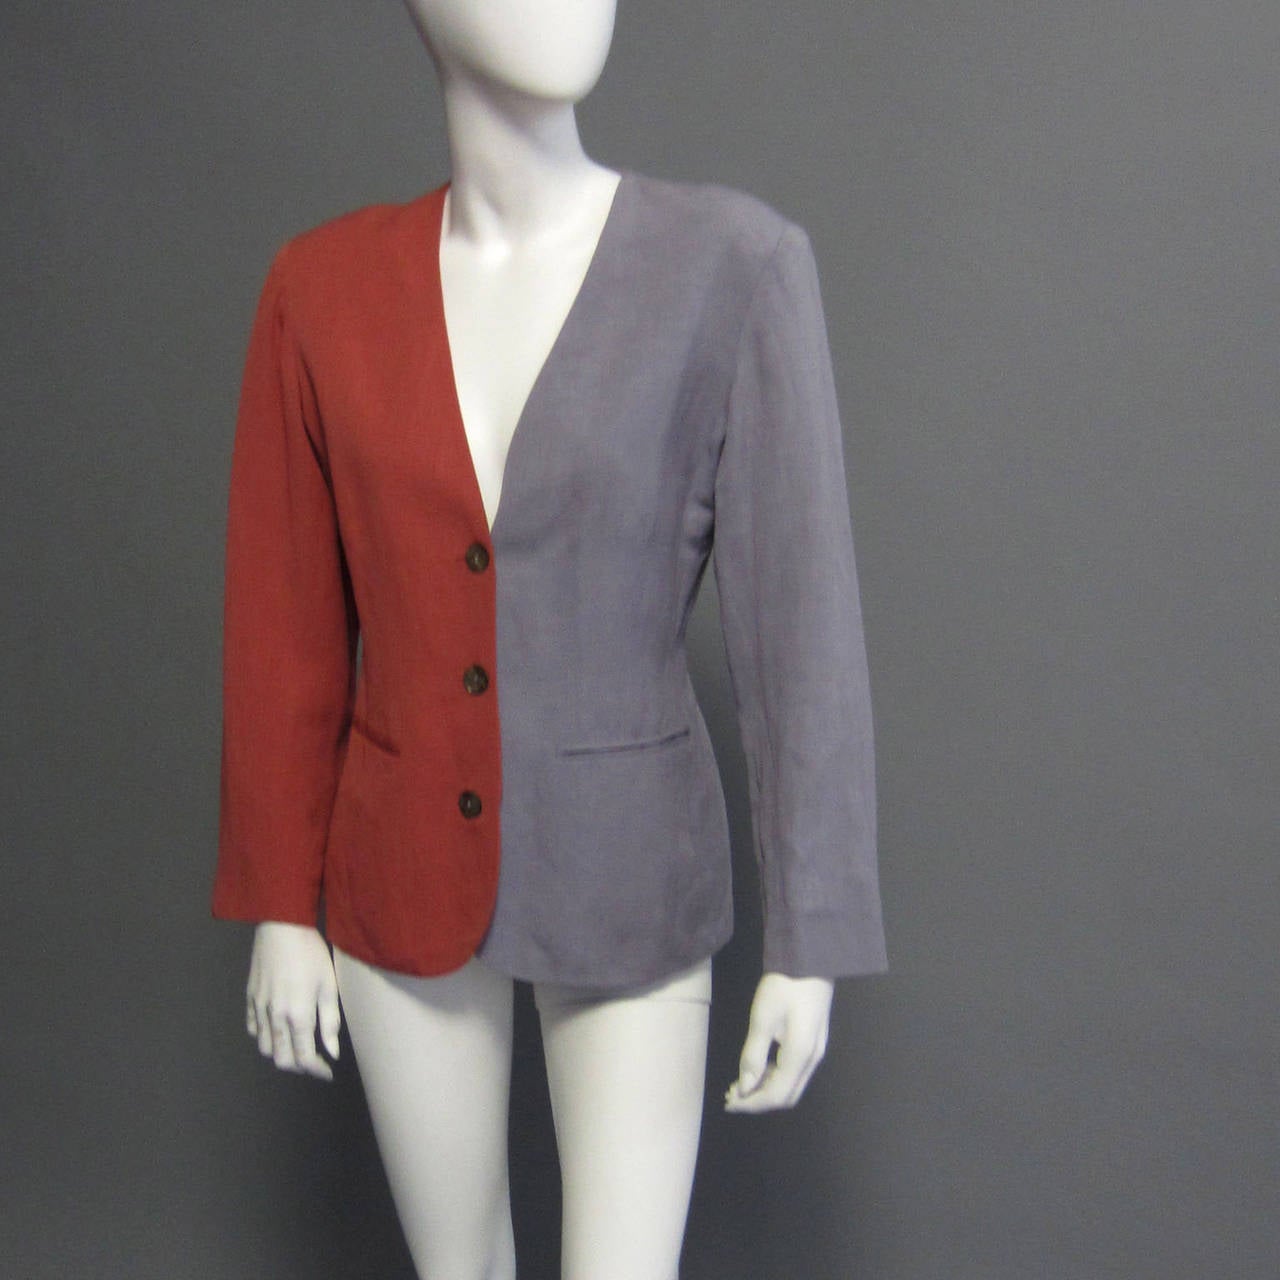 KENZO Color Blocked Blazer In Excellent Condition For Sale In New York, NY